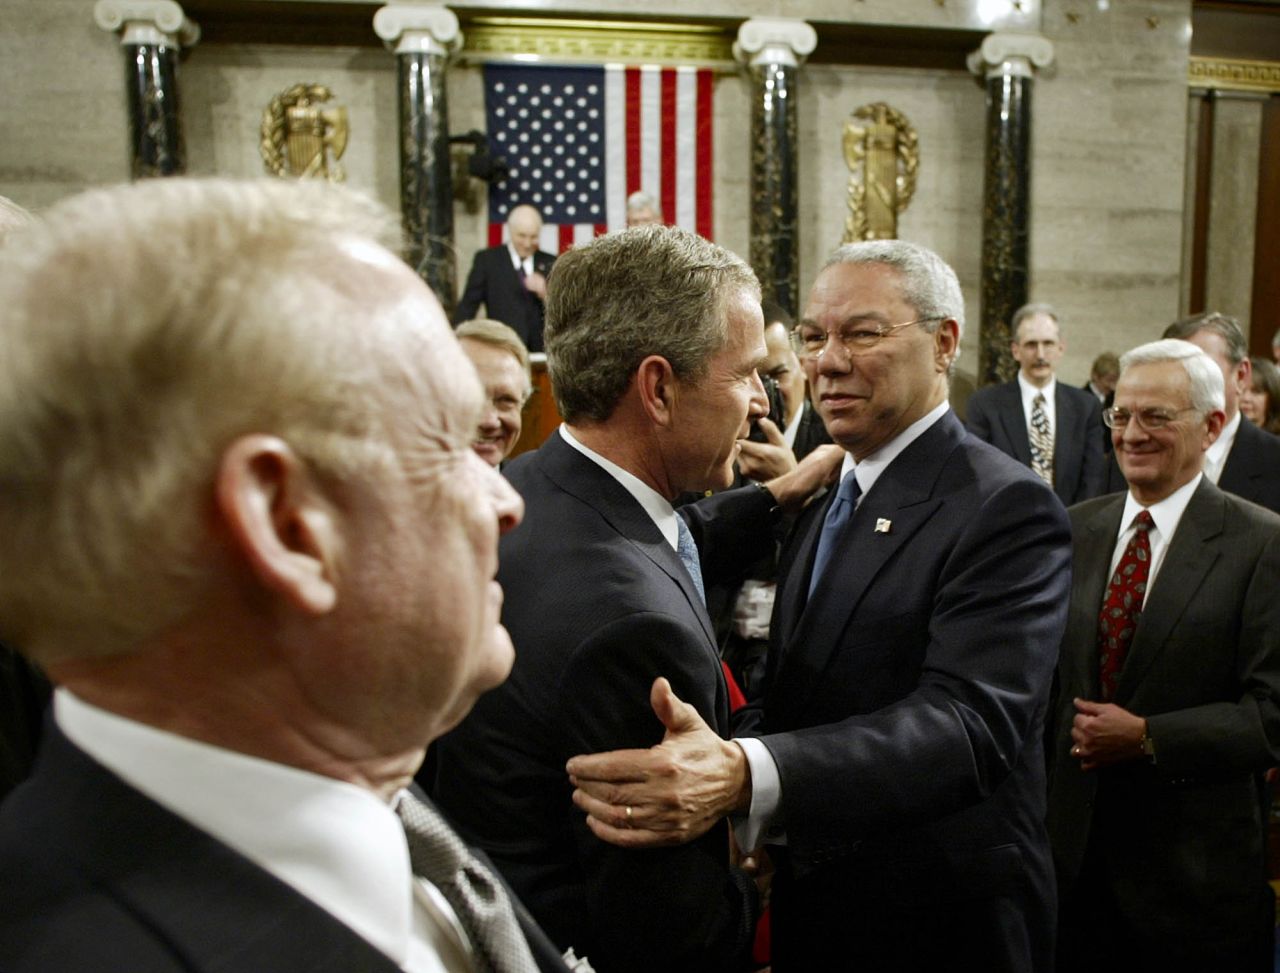 Secretary of State Colin Powell embraces President George W. Bush after Bush's annual address in 2002. Bush called North Korea, Iran and Iraq an "axis of evil" in the speech, which came four months after the 9/11 attacks. It was the first address streamed live online. 